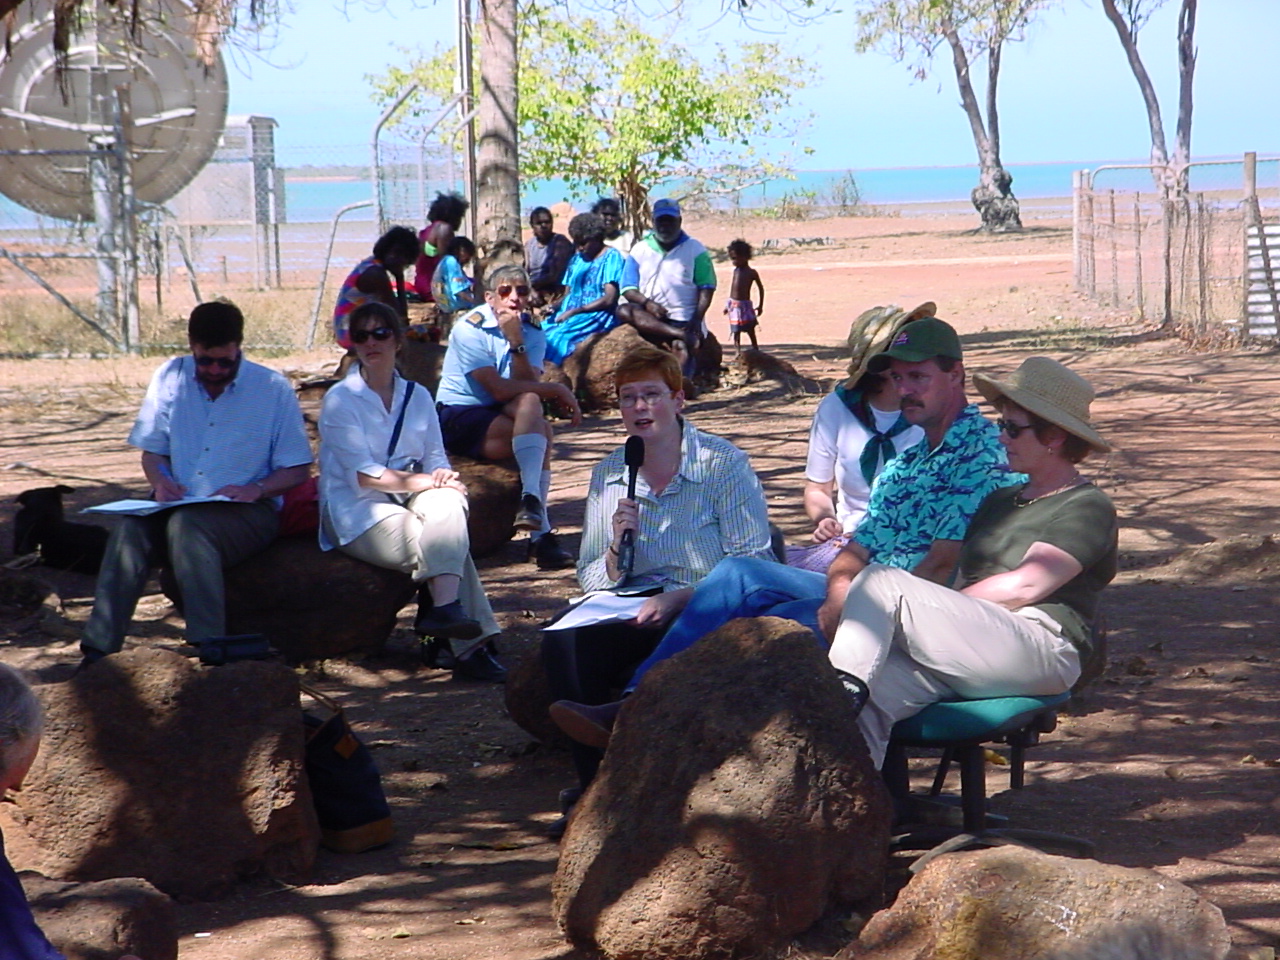 Acting committee chair Senator Marise Payne speaking to witnesses from the Warruwi and Minjilang communities at a  hearing on South Goulburn Island, NT, 11 September 2002. At right: L-R behind rock on right: Senators Ursula Stephens and Nigel Scullion.